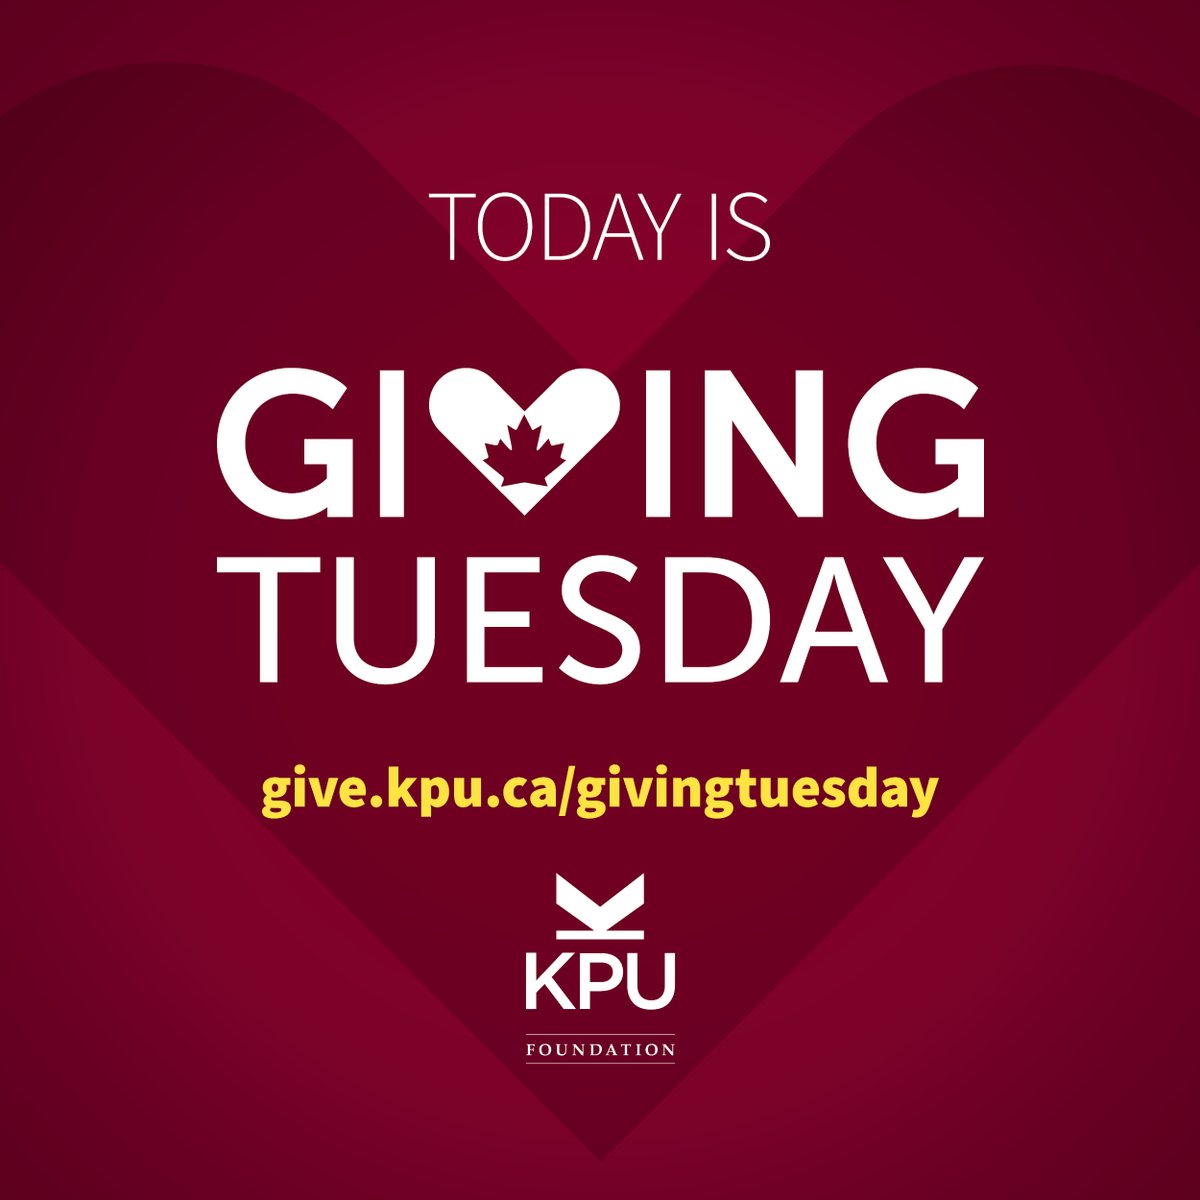 Today is Giving Tuesday! Help us support KPU students in need by making a donation. The funds raised today will create a new emergency food security fun as well as support existing funds, bursaries, and awards. Visit give.kpu.ca/donate and make your donation today!